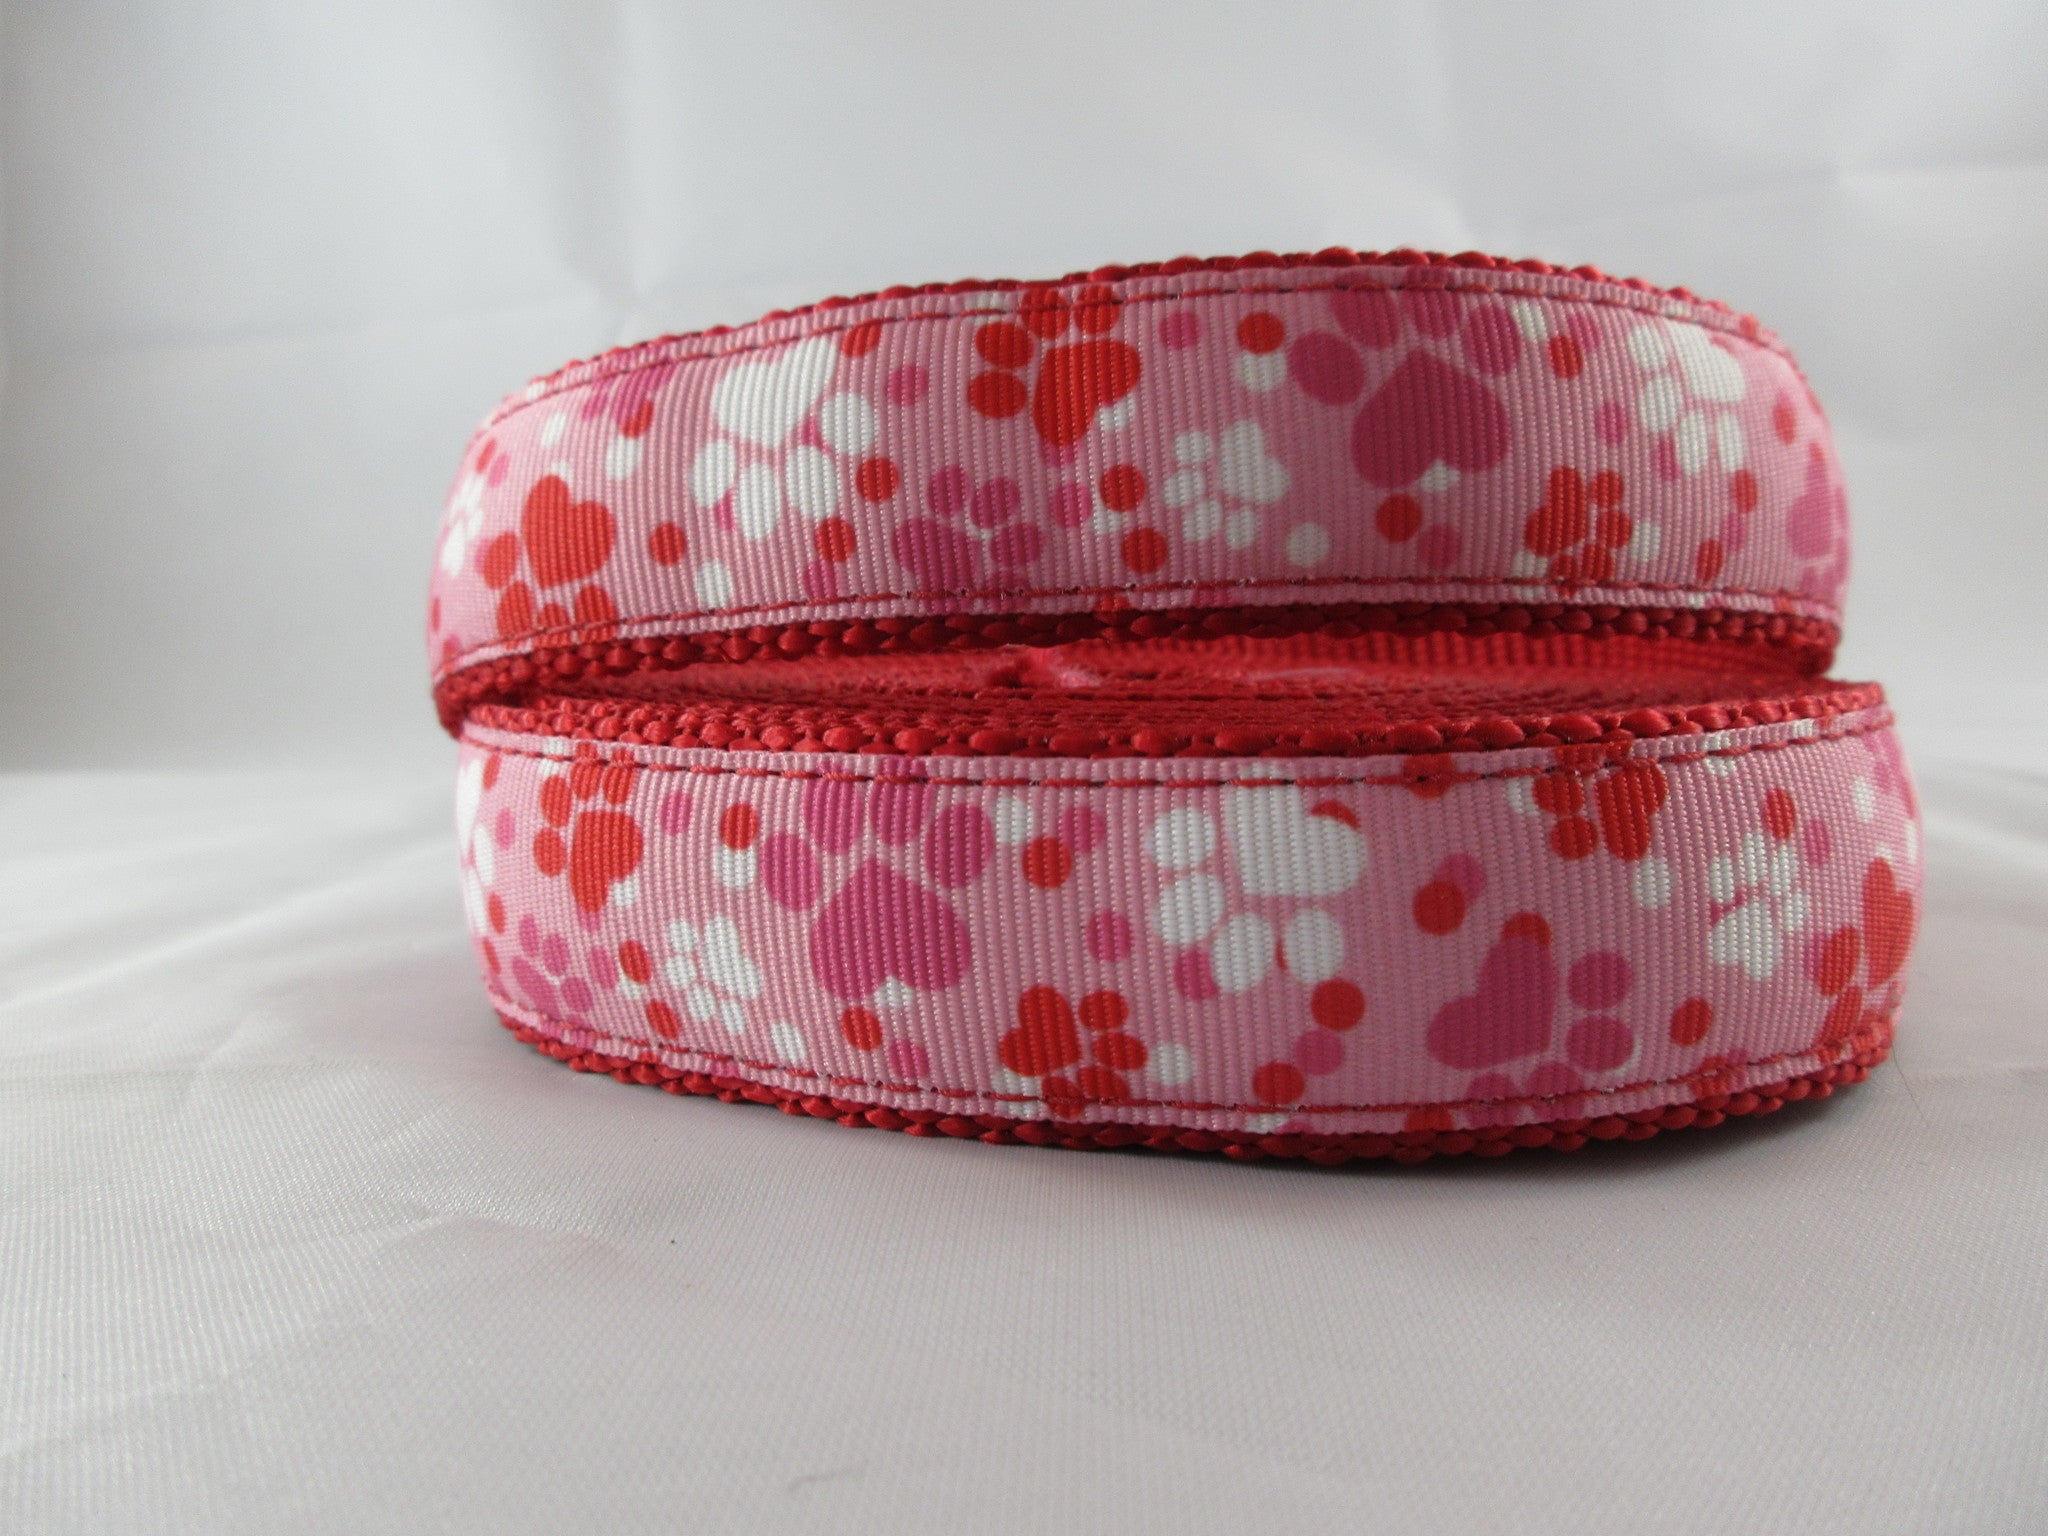 3/4" Puppy Love Dog Collar - Penny and Hoover's Pig Pen